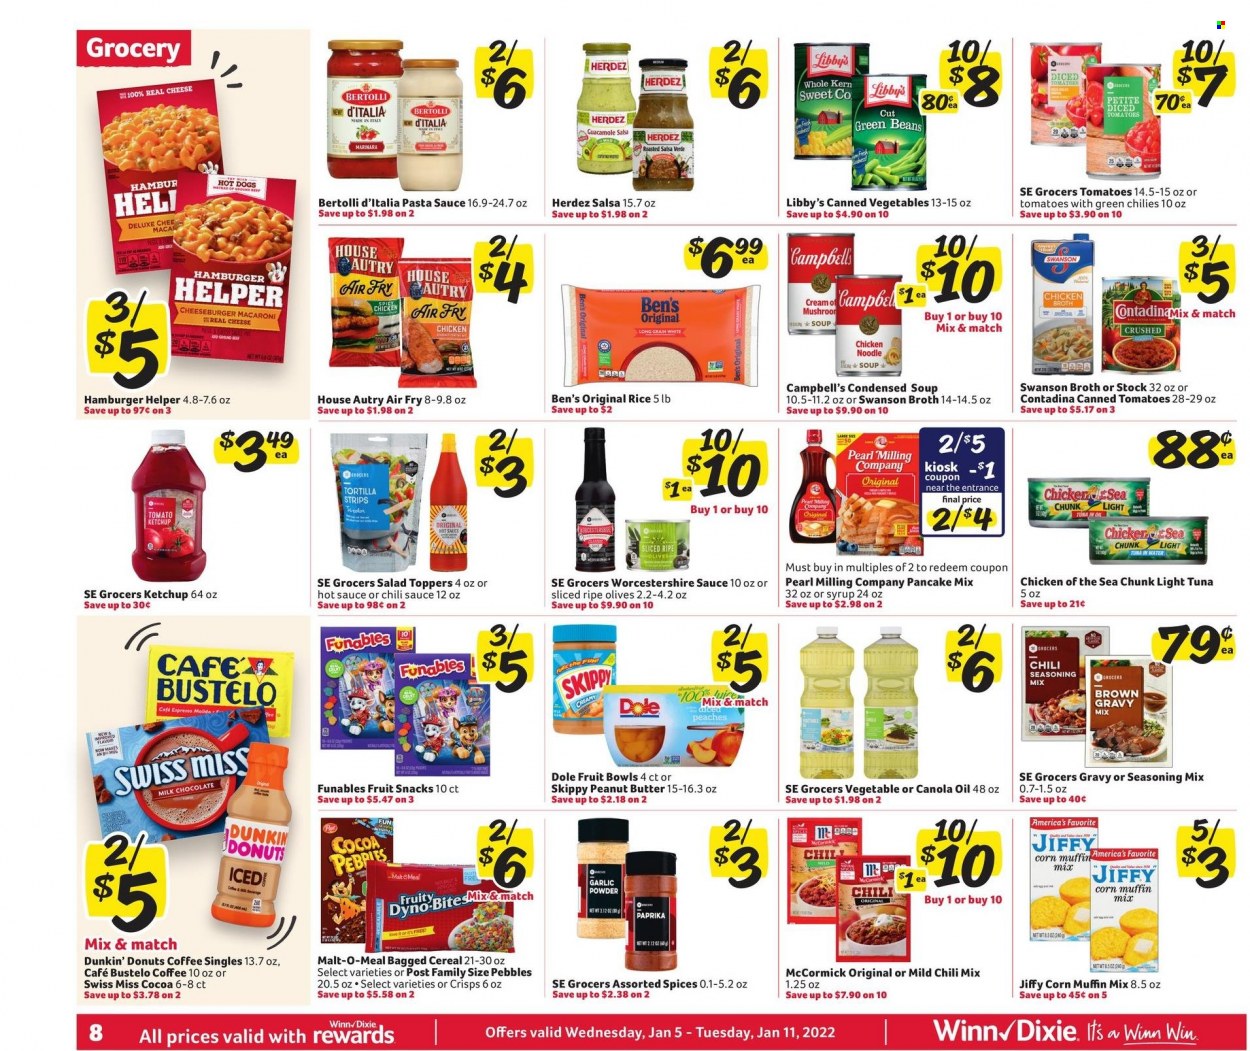 thumbnail - Winn Dixie Flyer - 01/05/2022 - 01/11/2022 - Sales products - tortillas, Dunkin' Donuts, muffin mix, corn, green beans, salad, Dole, tuna, Campbell's, hot dog, pasta sauce, macaroni, condensed soup, soup, cheeseburger, pancakes, noodles cup, noodles, instant soup, Bertolli, guacamole, cheese, Swiss Miss, milk chocolate, chocolate, fruit snack, cocoa, chicken broth, broth, malt, corn muffin, tuna in water, olives, canned vegetables, light tuna, Chicken of the Sea, cereals, rice, spice, garlic powder, worcestershire sauce, hot sauce, ketchup, chilli sauce, salsa, canola oil, oil, peanut butter, coffee, pot, peaches. Page 12.